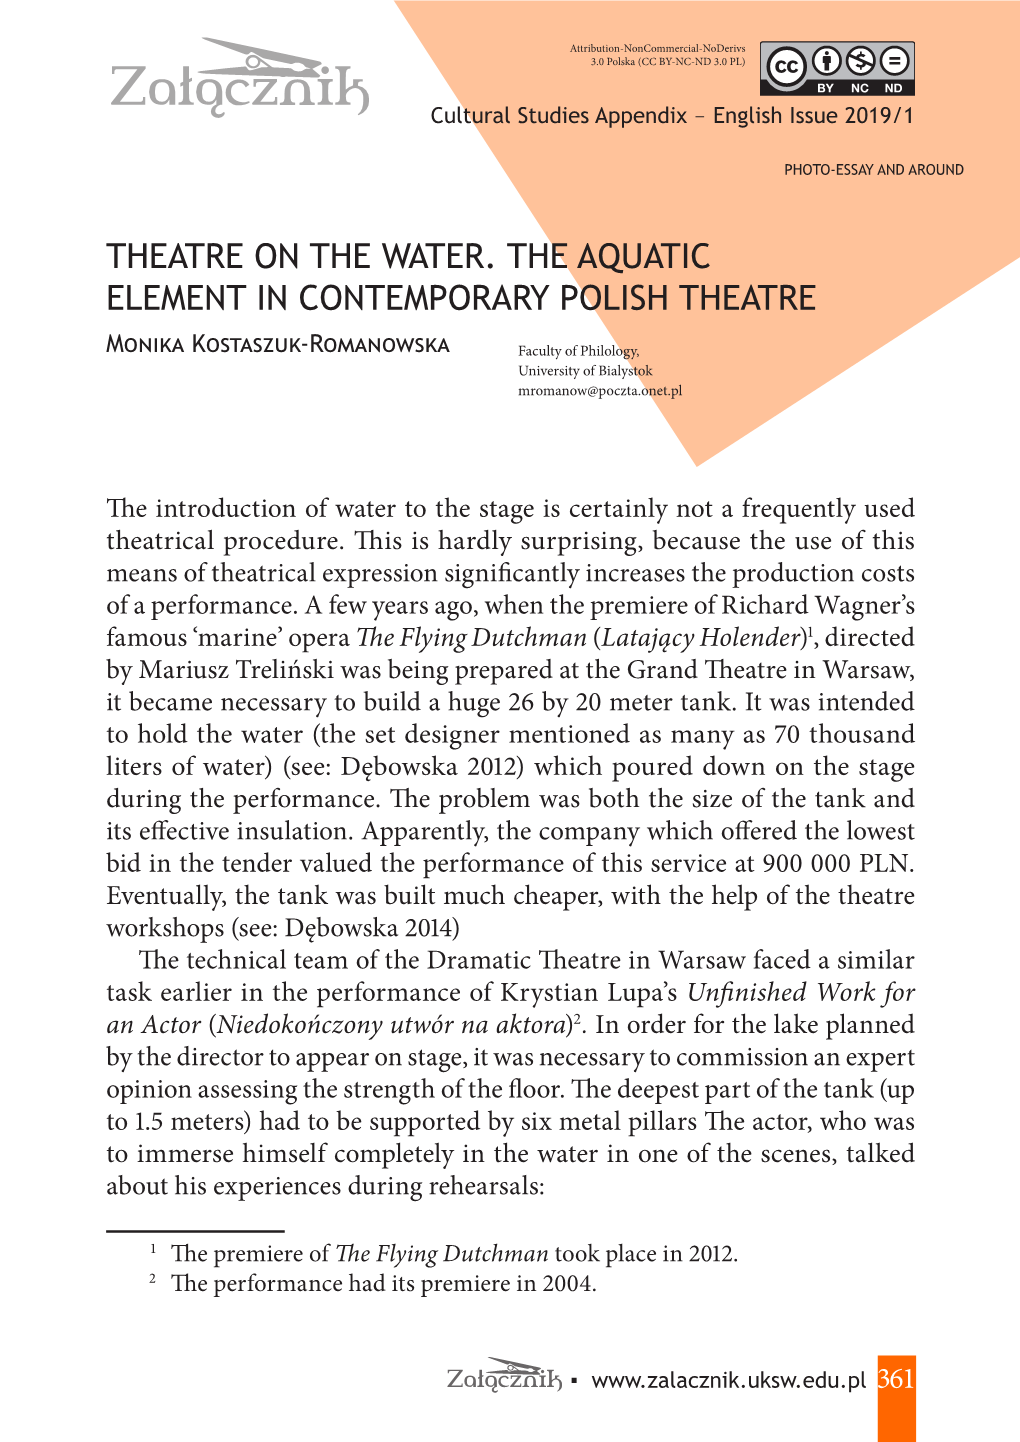 Theatre on the Water. the Aquatic Element in Contemporary Polish Theatre